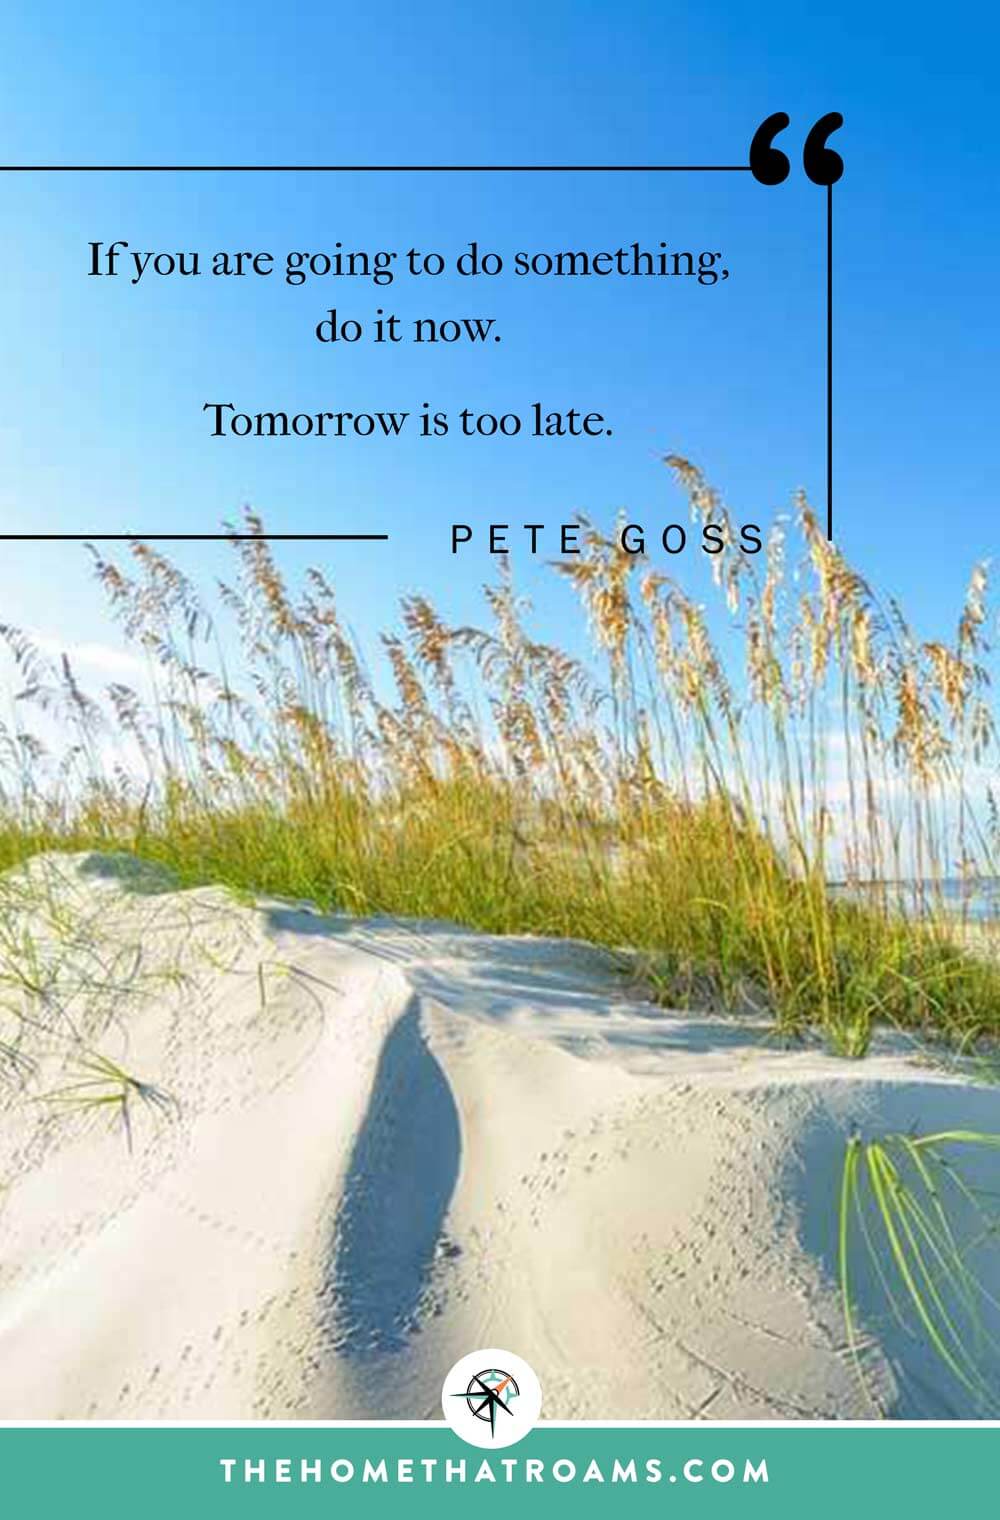 Pinterest image of sand dunes with text overlay of Pete Goss quote.